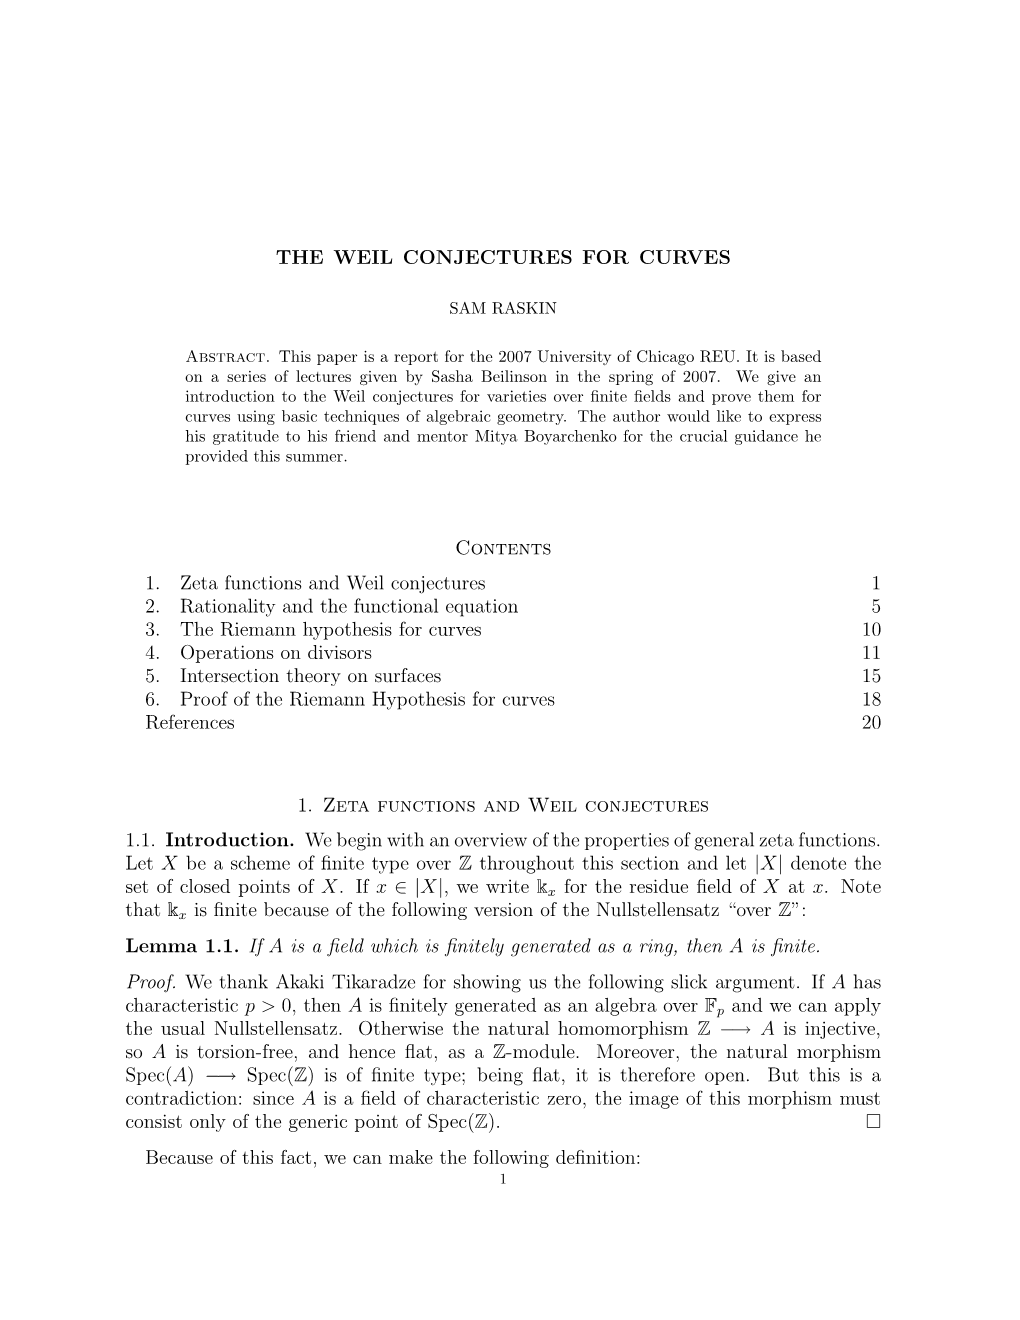 THE WEIL CONJECTURES for CURVES Contents 1. Zeta Functions and Weil Conjectures 1 2. Rationality and the Functional Equation